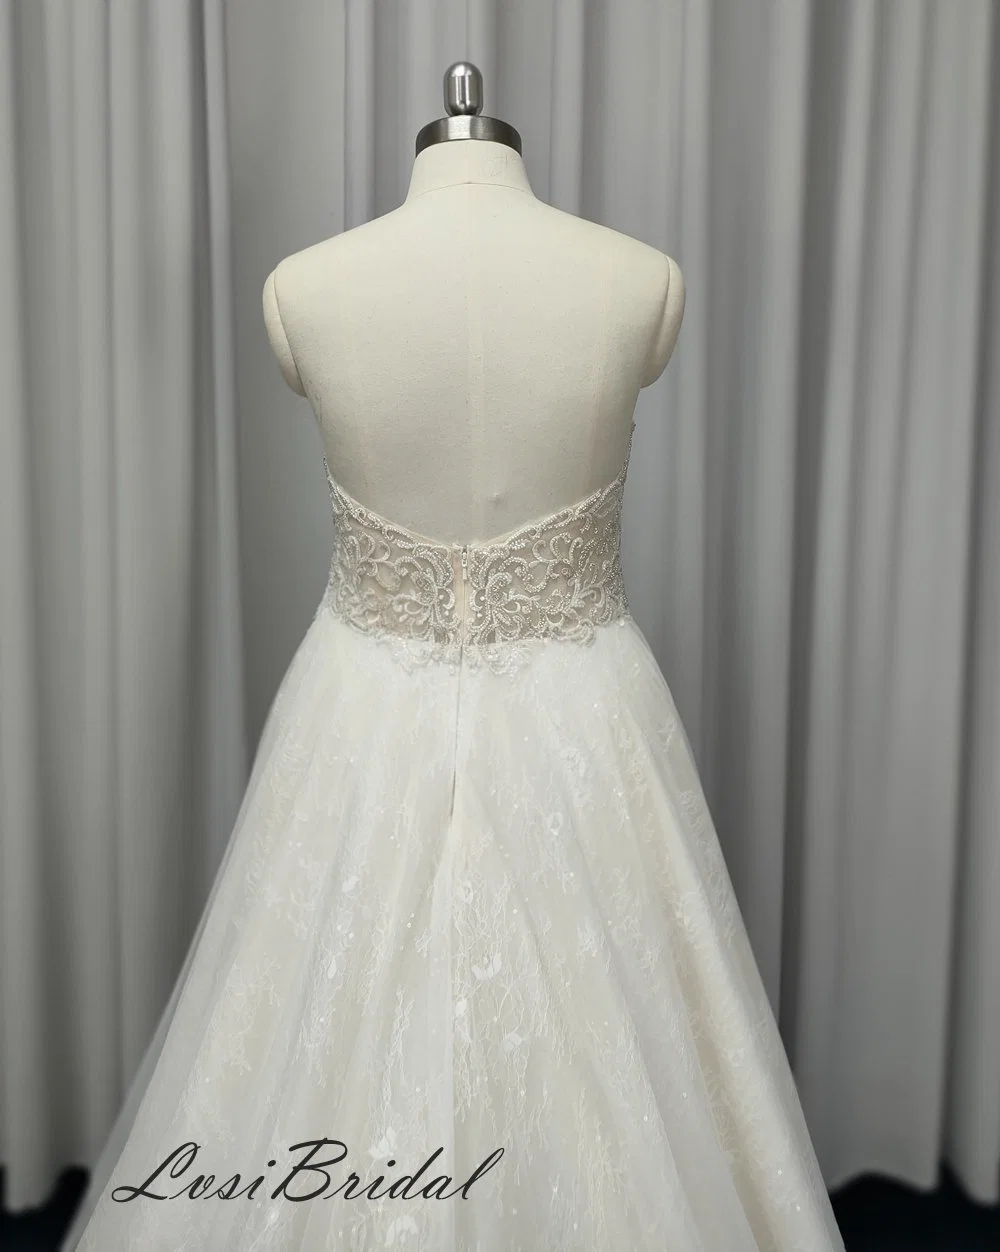 505 Sweetheart Neckline and Illusion Bodice with Wedding Dress A-Line Sparkling Tulle Dress Embroidery Beading Lace Bridal Gown Dress